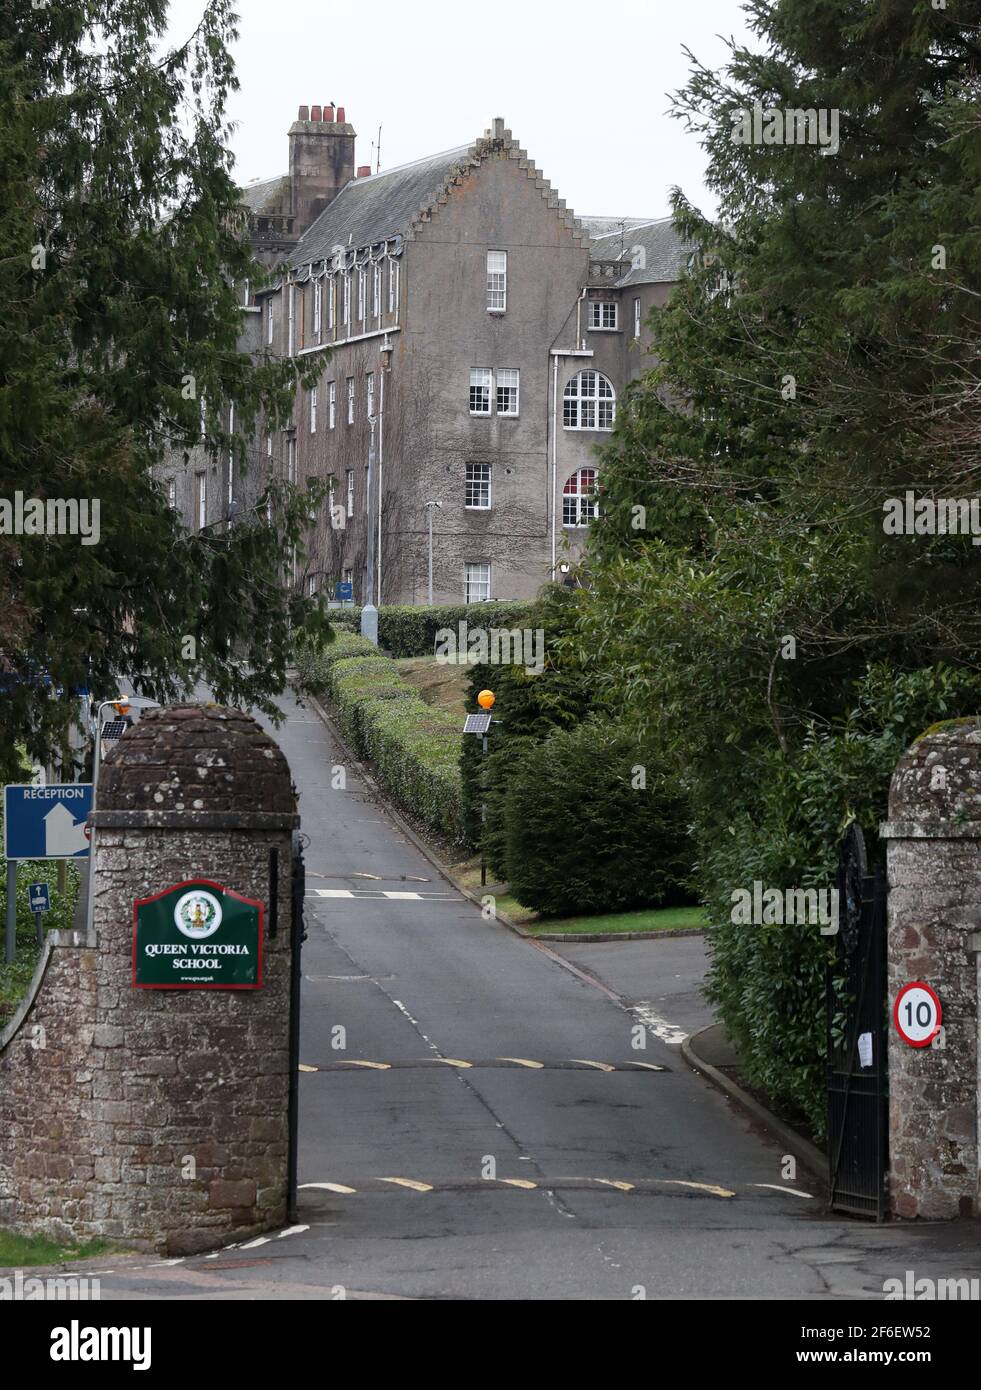 Entrance to Queen Victoria School in Dunblane. Donald Shaw, headmaster of the boarding school since 2016, gave evidence to the Scottish Child Abuse Inquiry on Wednesday March 31, the inquiry heard there were five allegations made about abuse at the school between 1908 and 2014, although there were no criminal convictions. Picture date: Wednesday March 31, 2021. Stock Photo